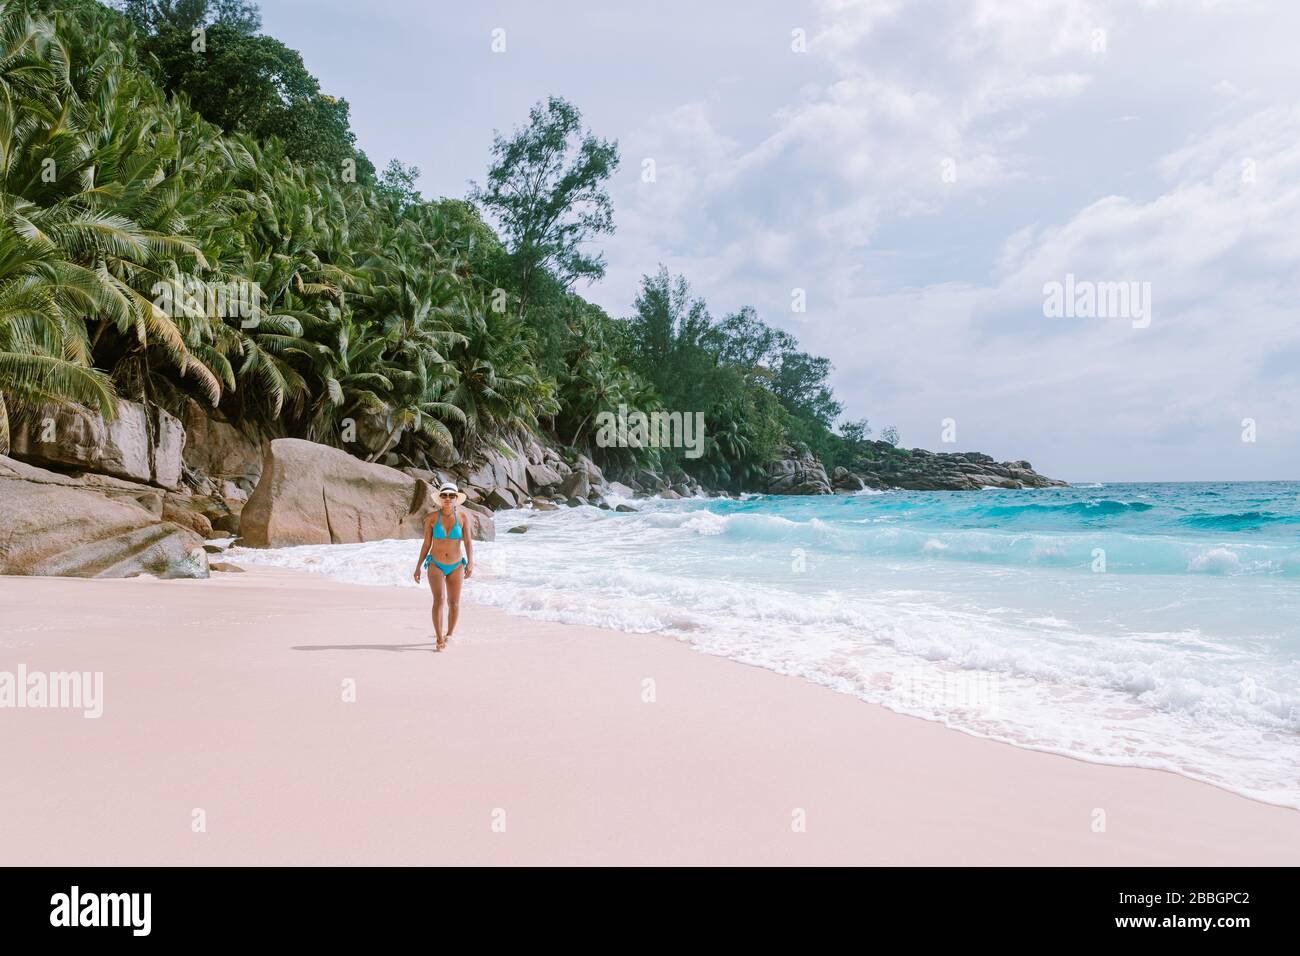 Petite Anse Mahe Seychelles, young woman on the beach, mid age Asian woman walking on tropical beach Seychelles Stock Photo